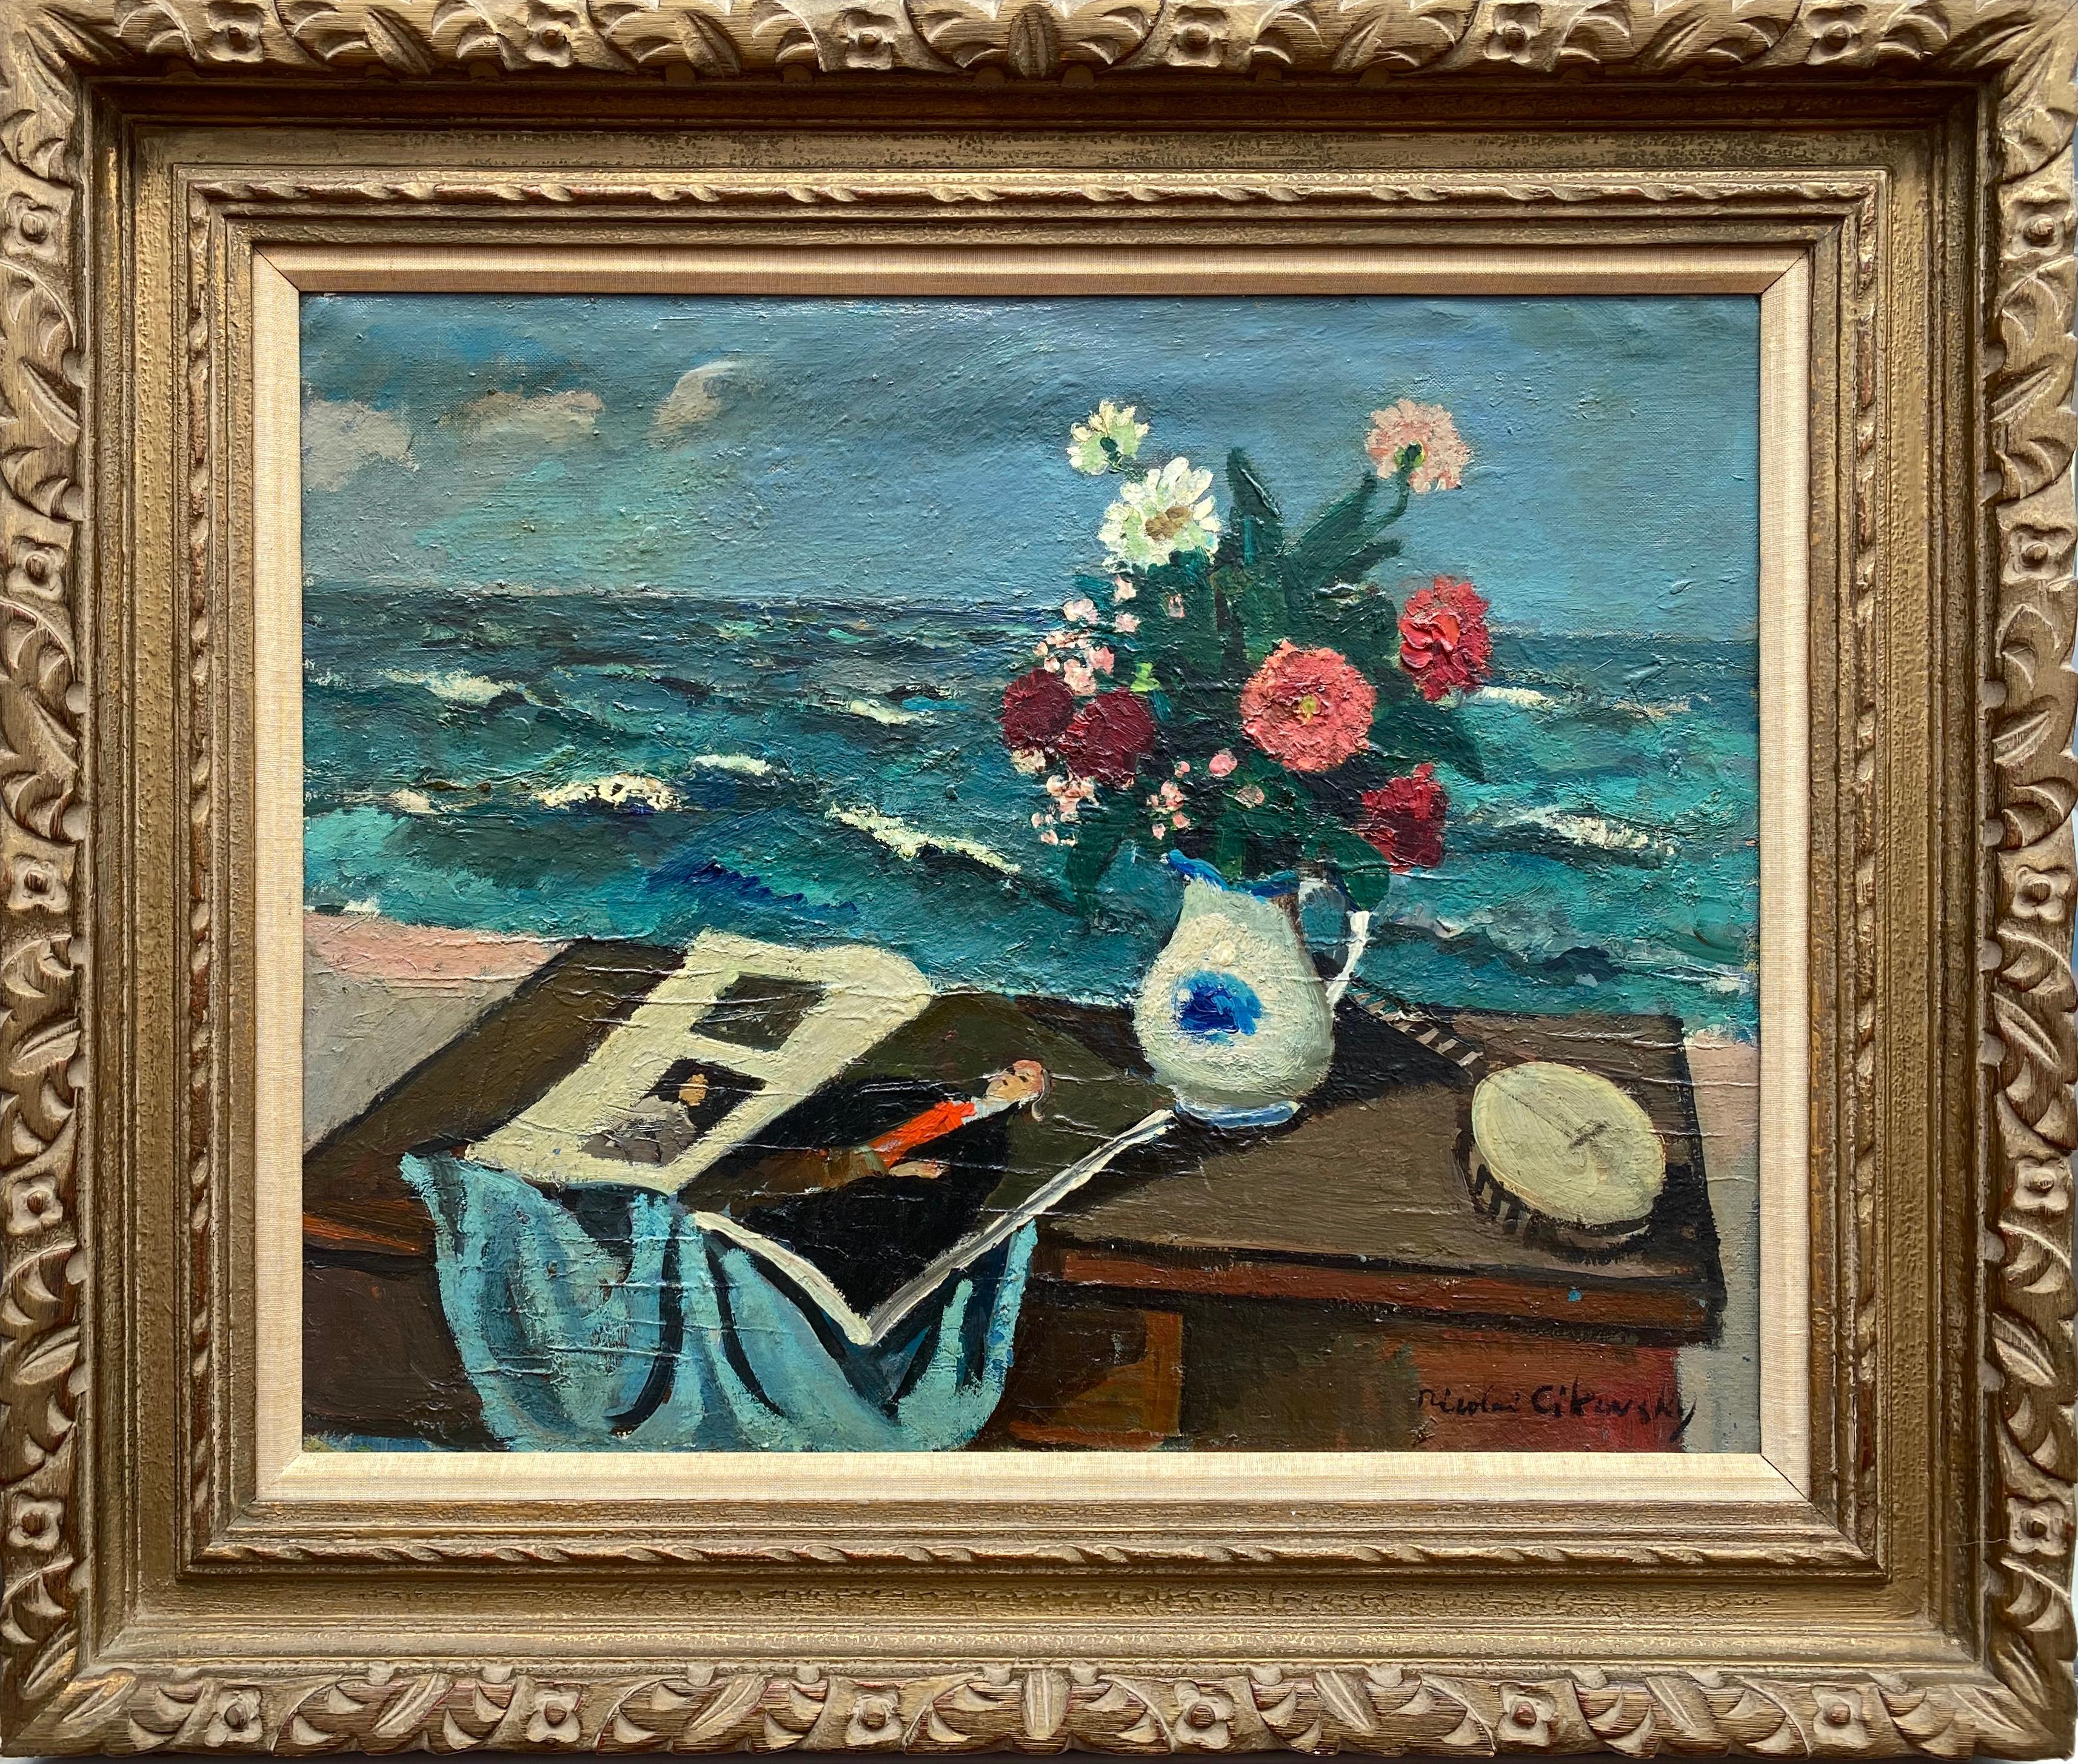 “Bouquet by the Sea” - Painting by Nicolai Cikovsky